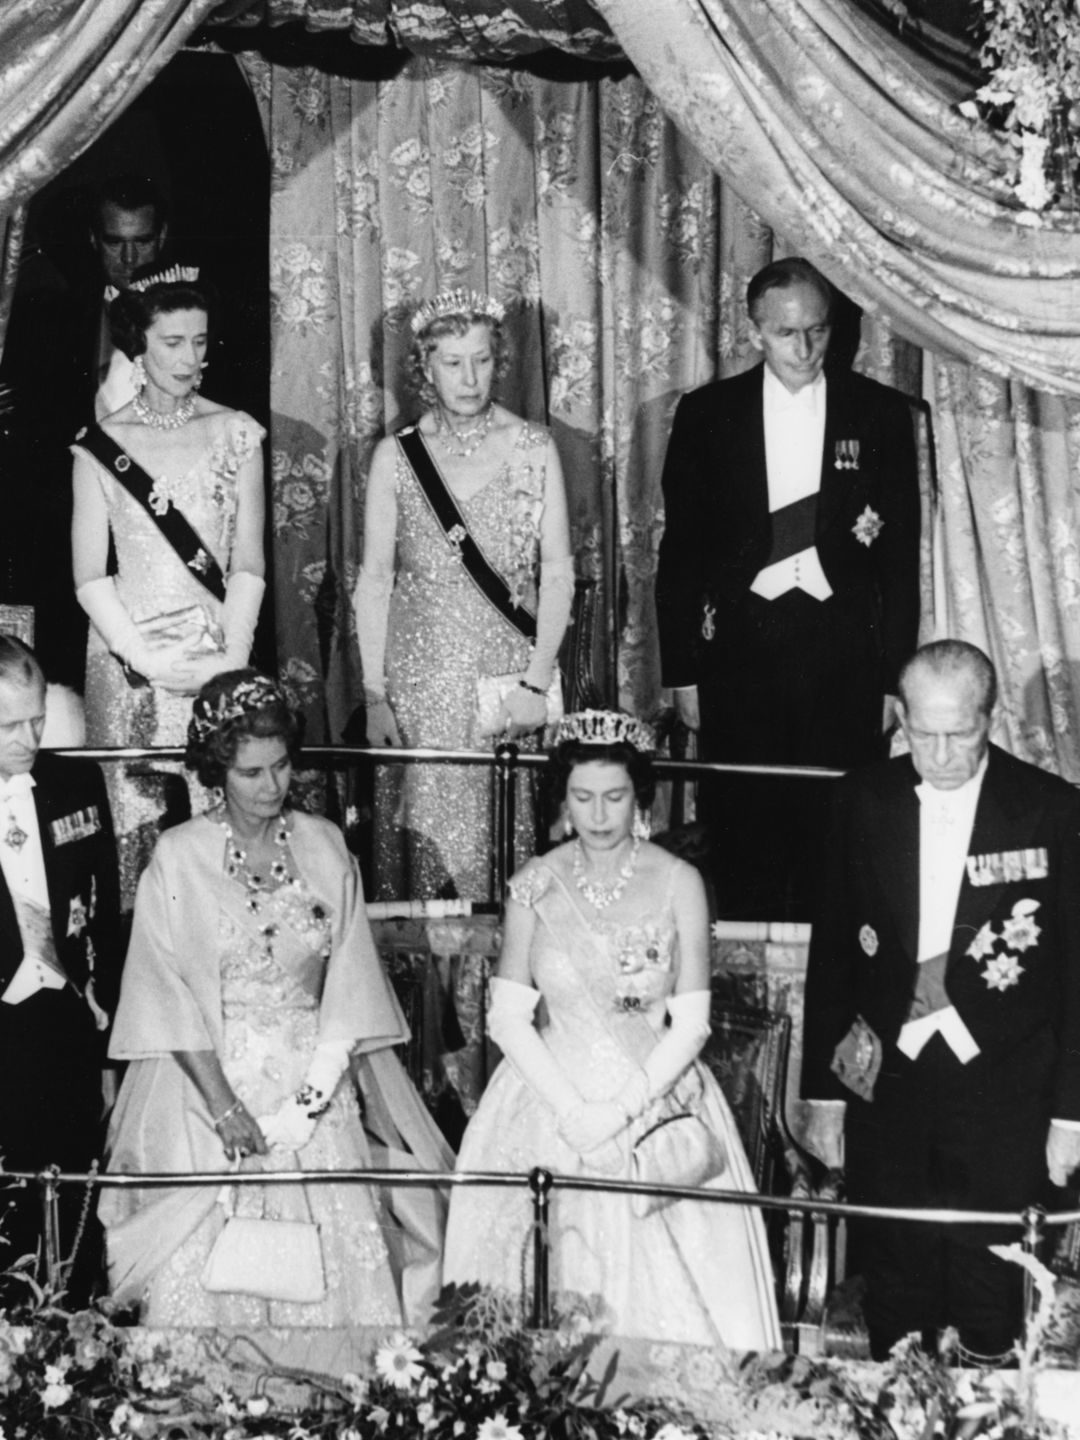 Princess Mary (stood behind Queen Elizabeth II) wore the Harewood Fringe to an event at the Aldwych Theatre in London on July 11 1963.